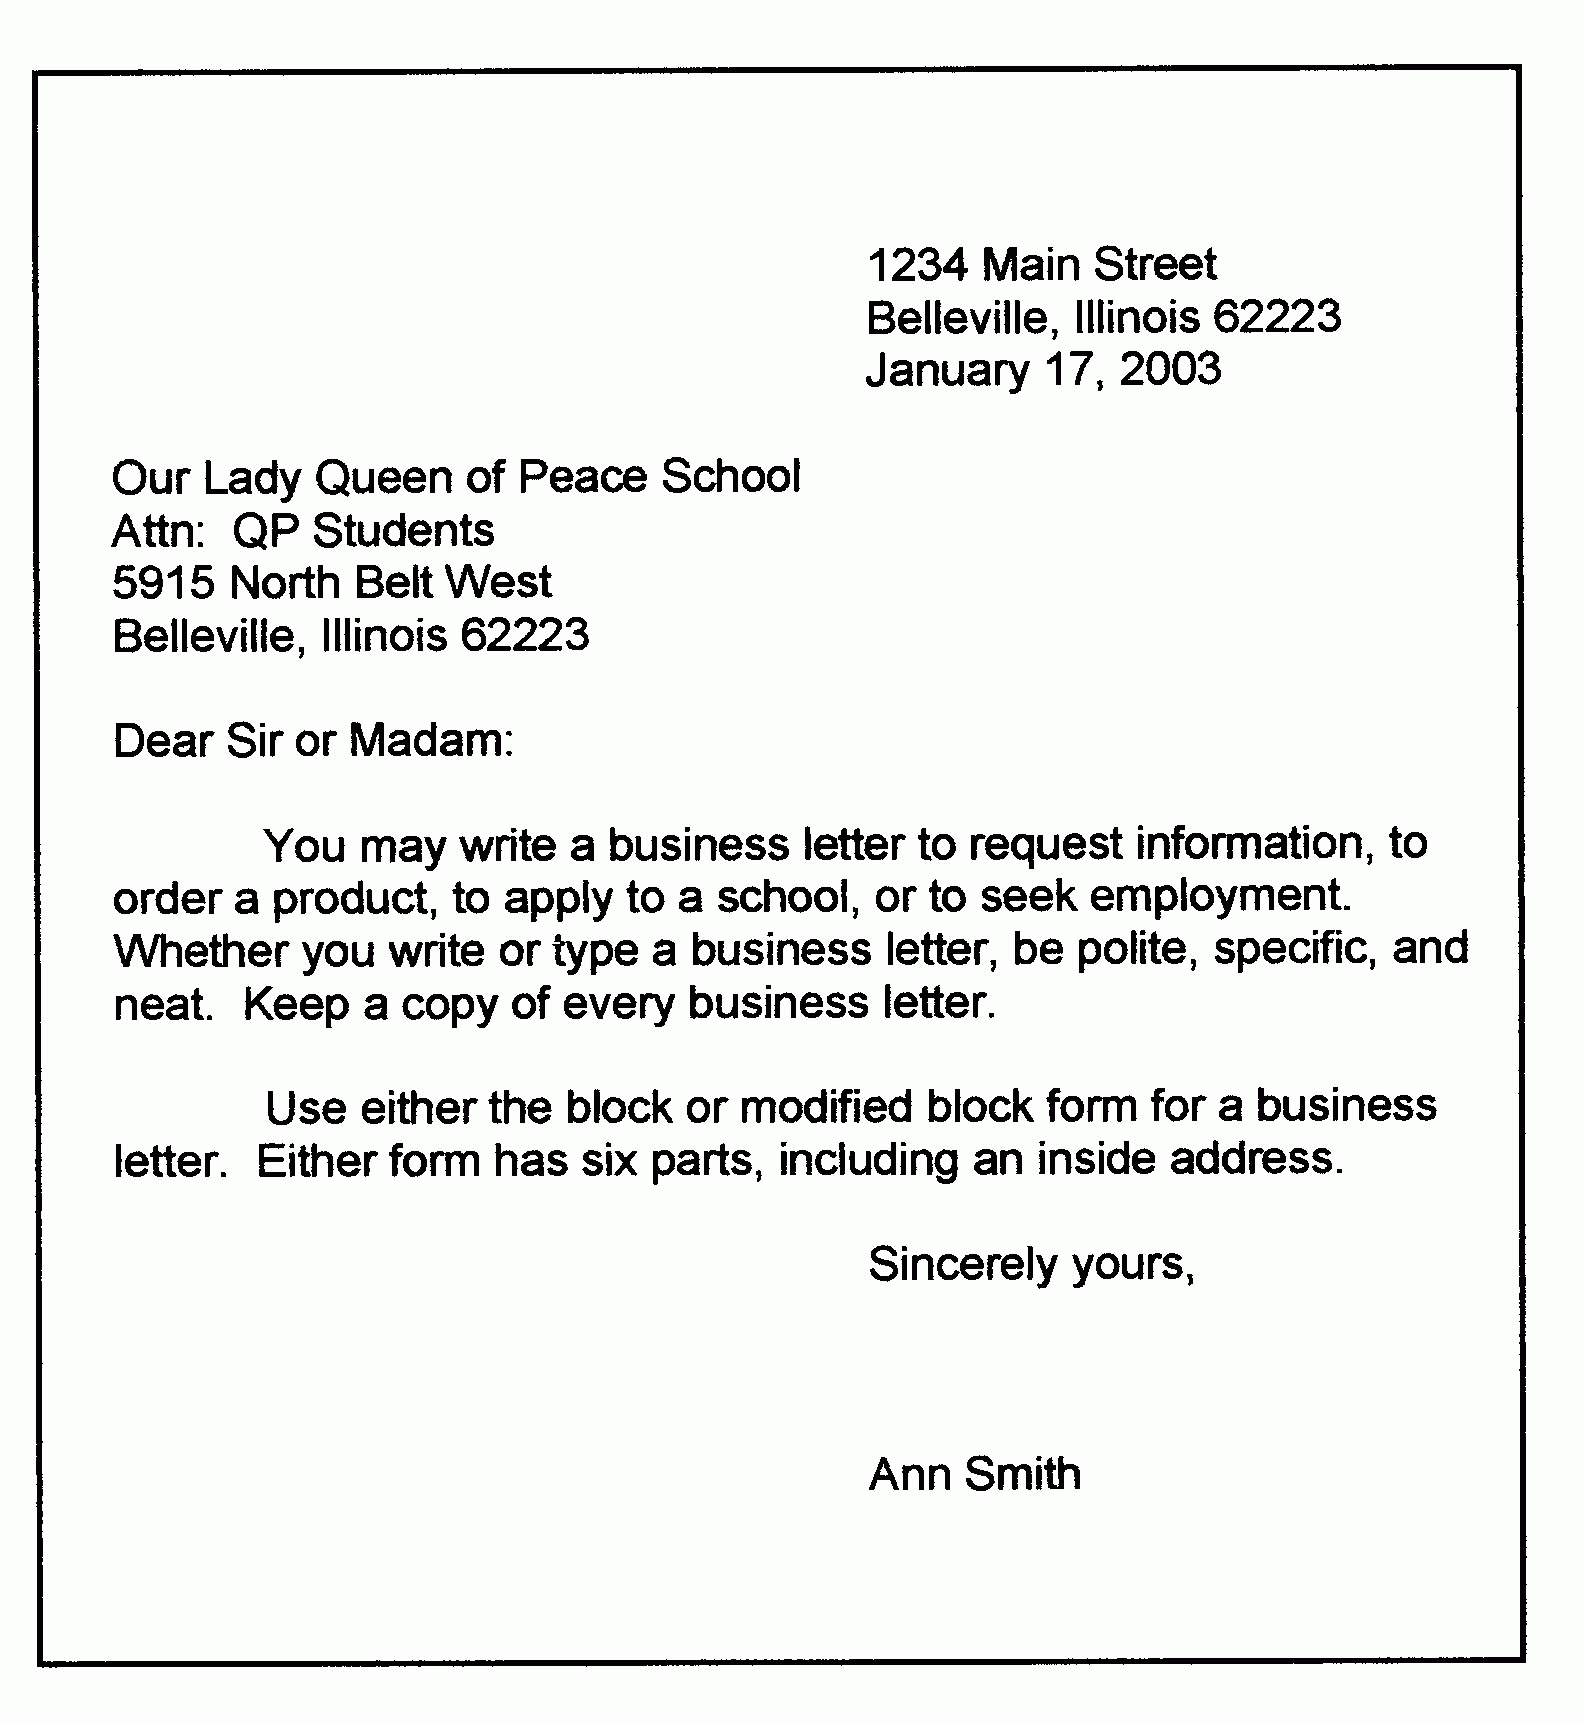 Personal Business Letter Format | Sample Business Letter Intended For Modified Block Letter Template Word